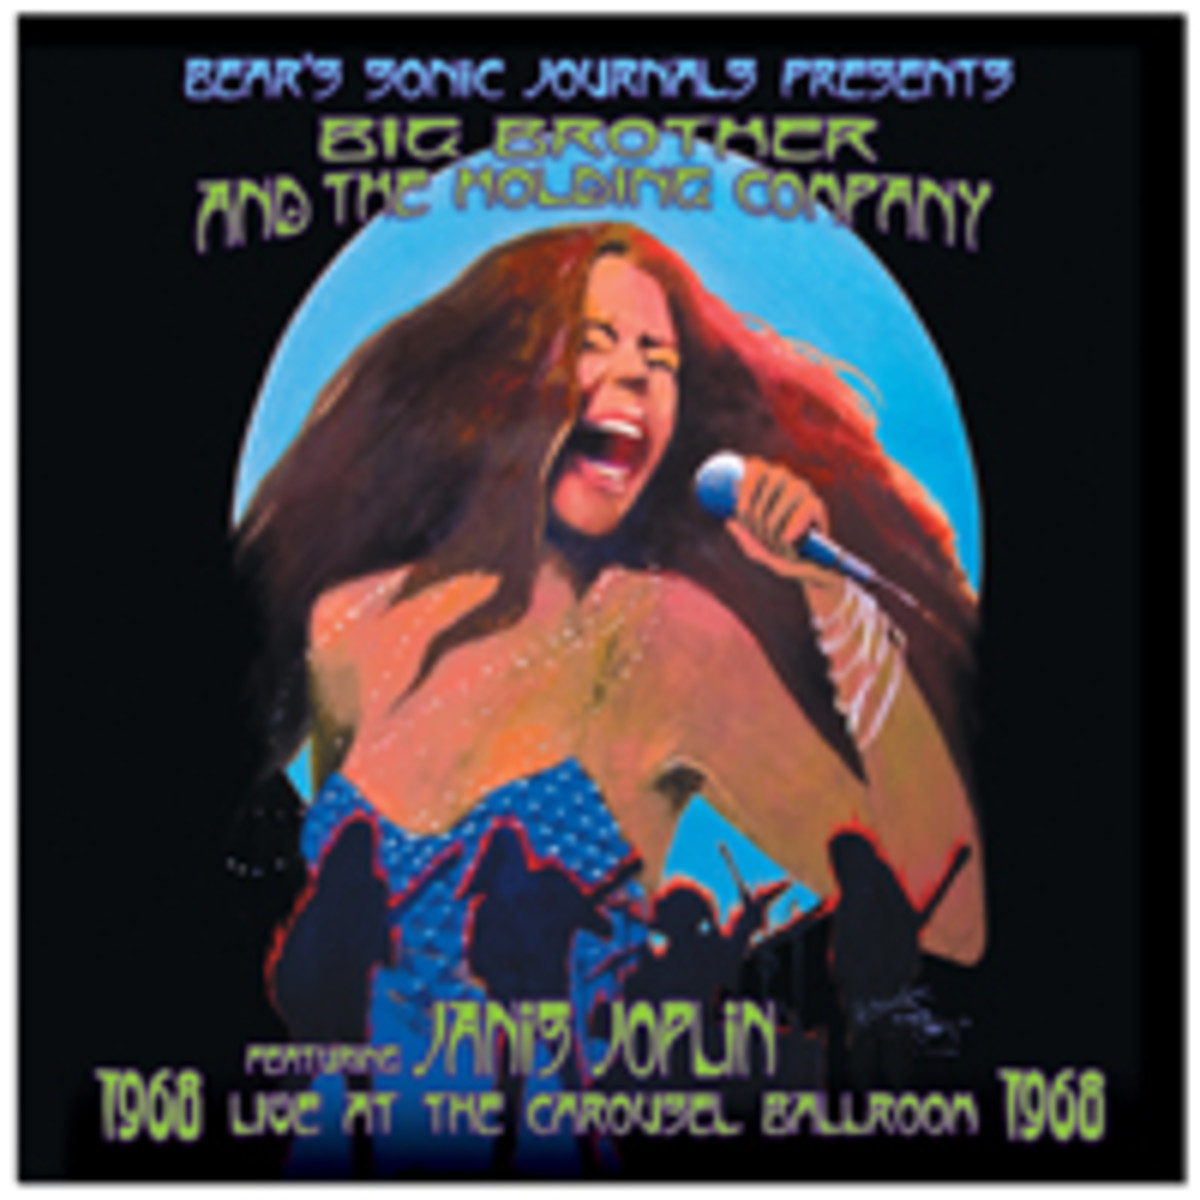 Big Brother And The Holding Company Featuring Janis Joplin